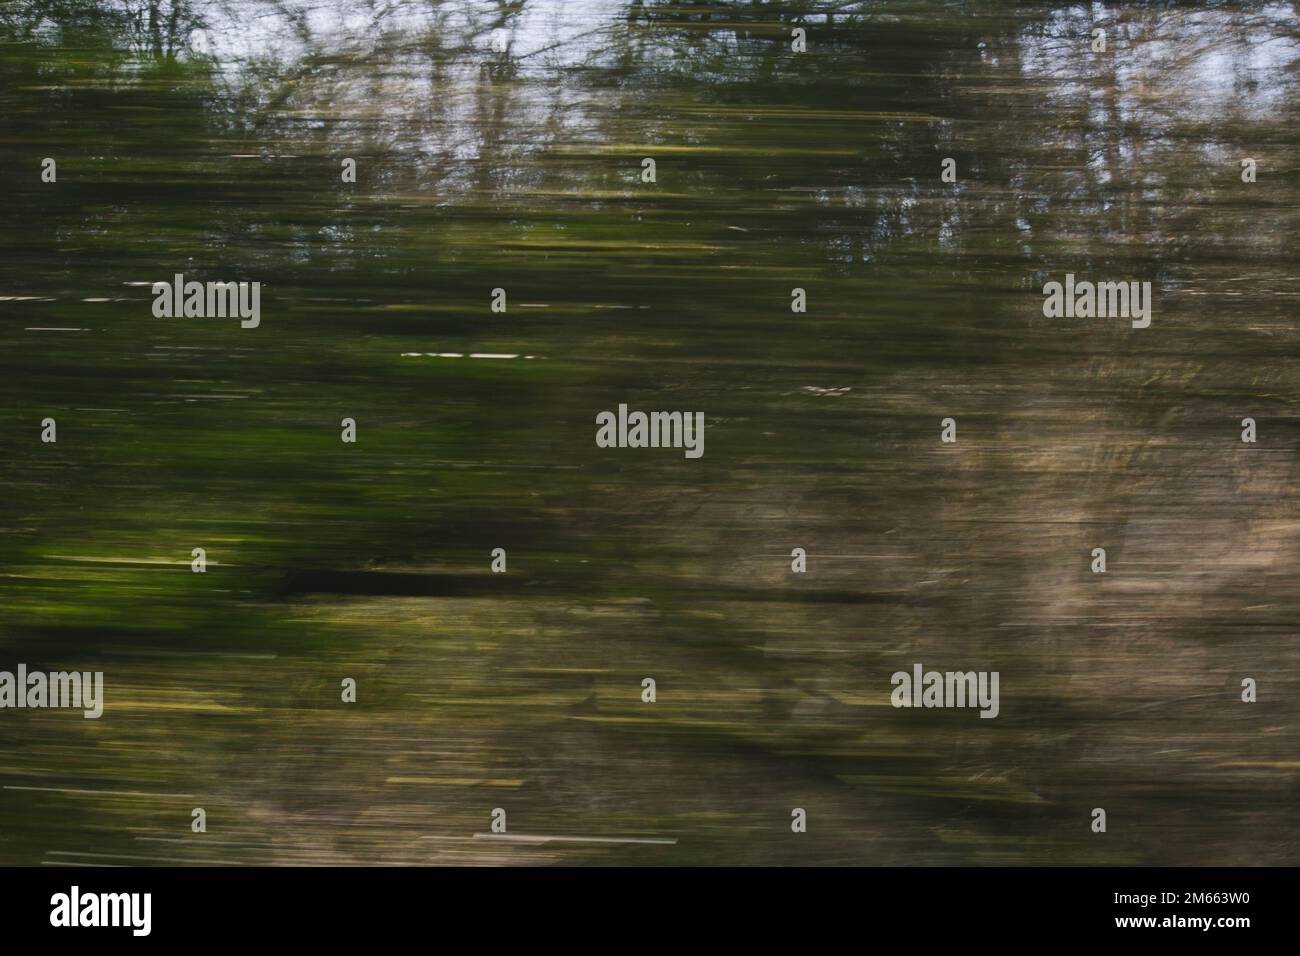 Motion blur of trees taken from a moving vehicle on a road running through a forest in the countryside Stock Photo